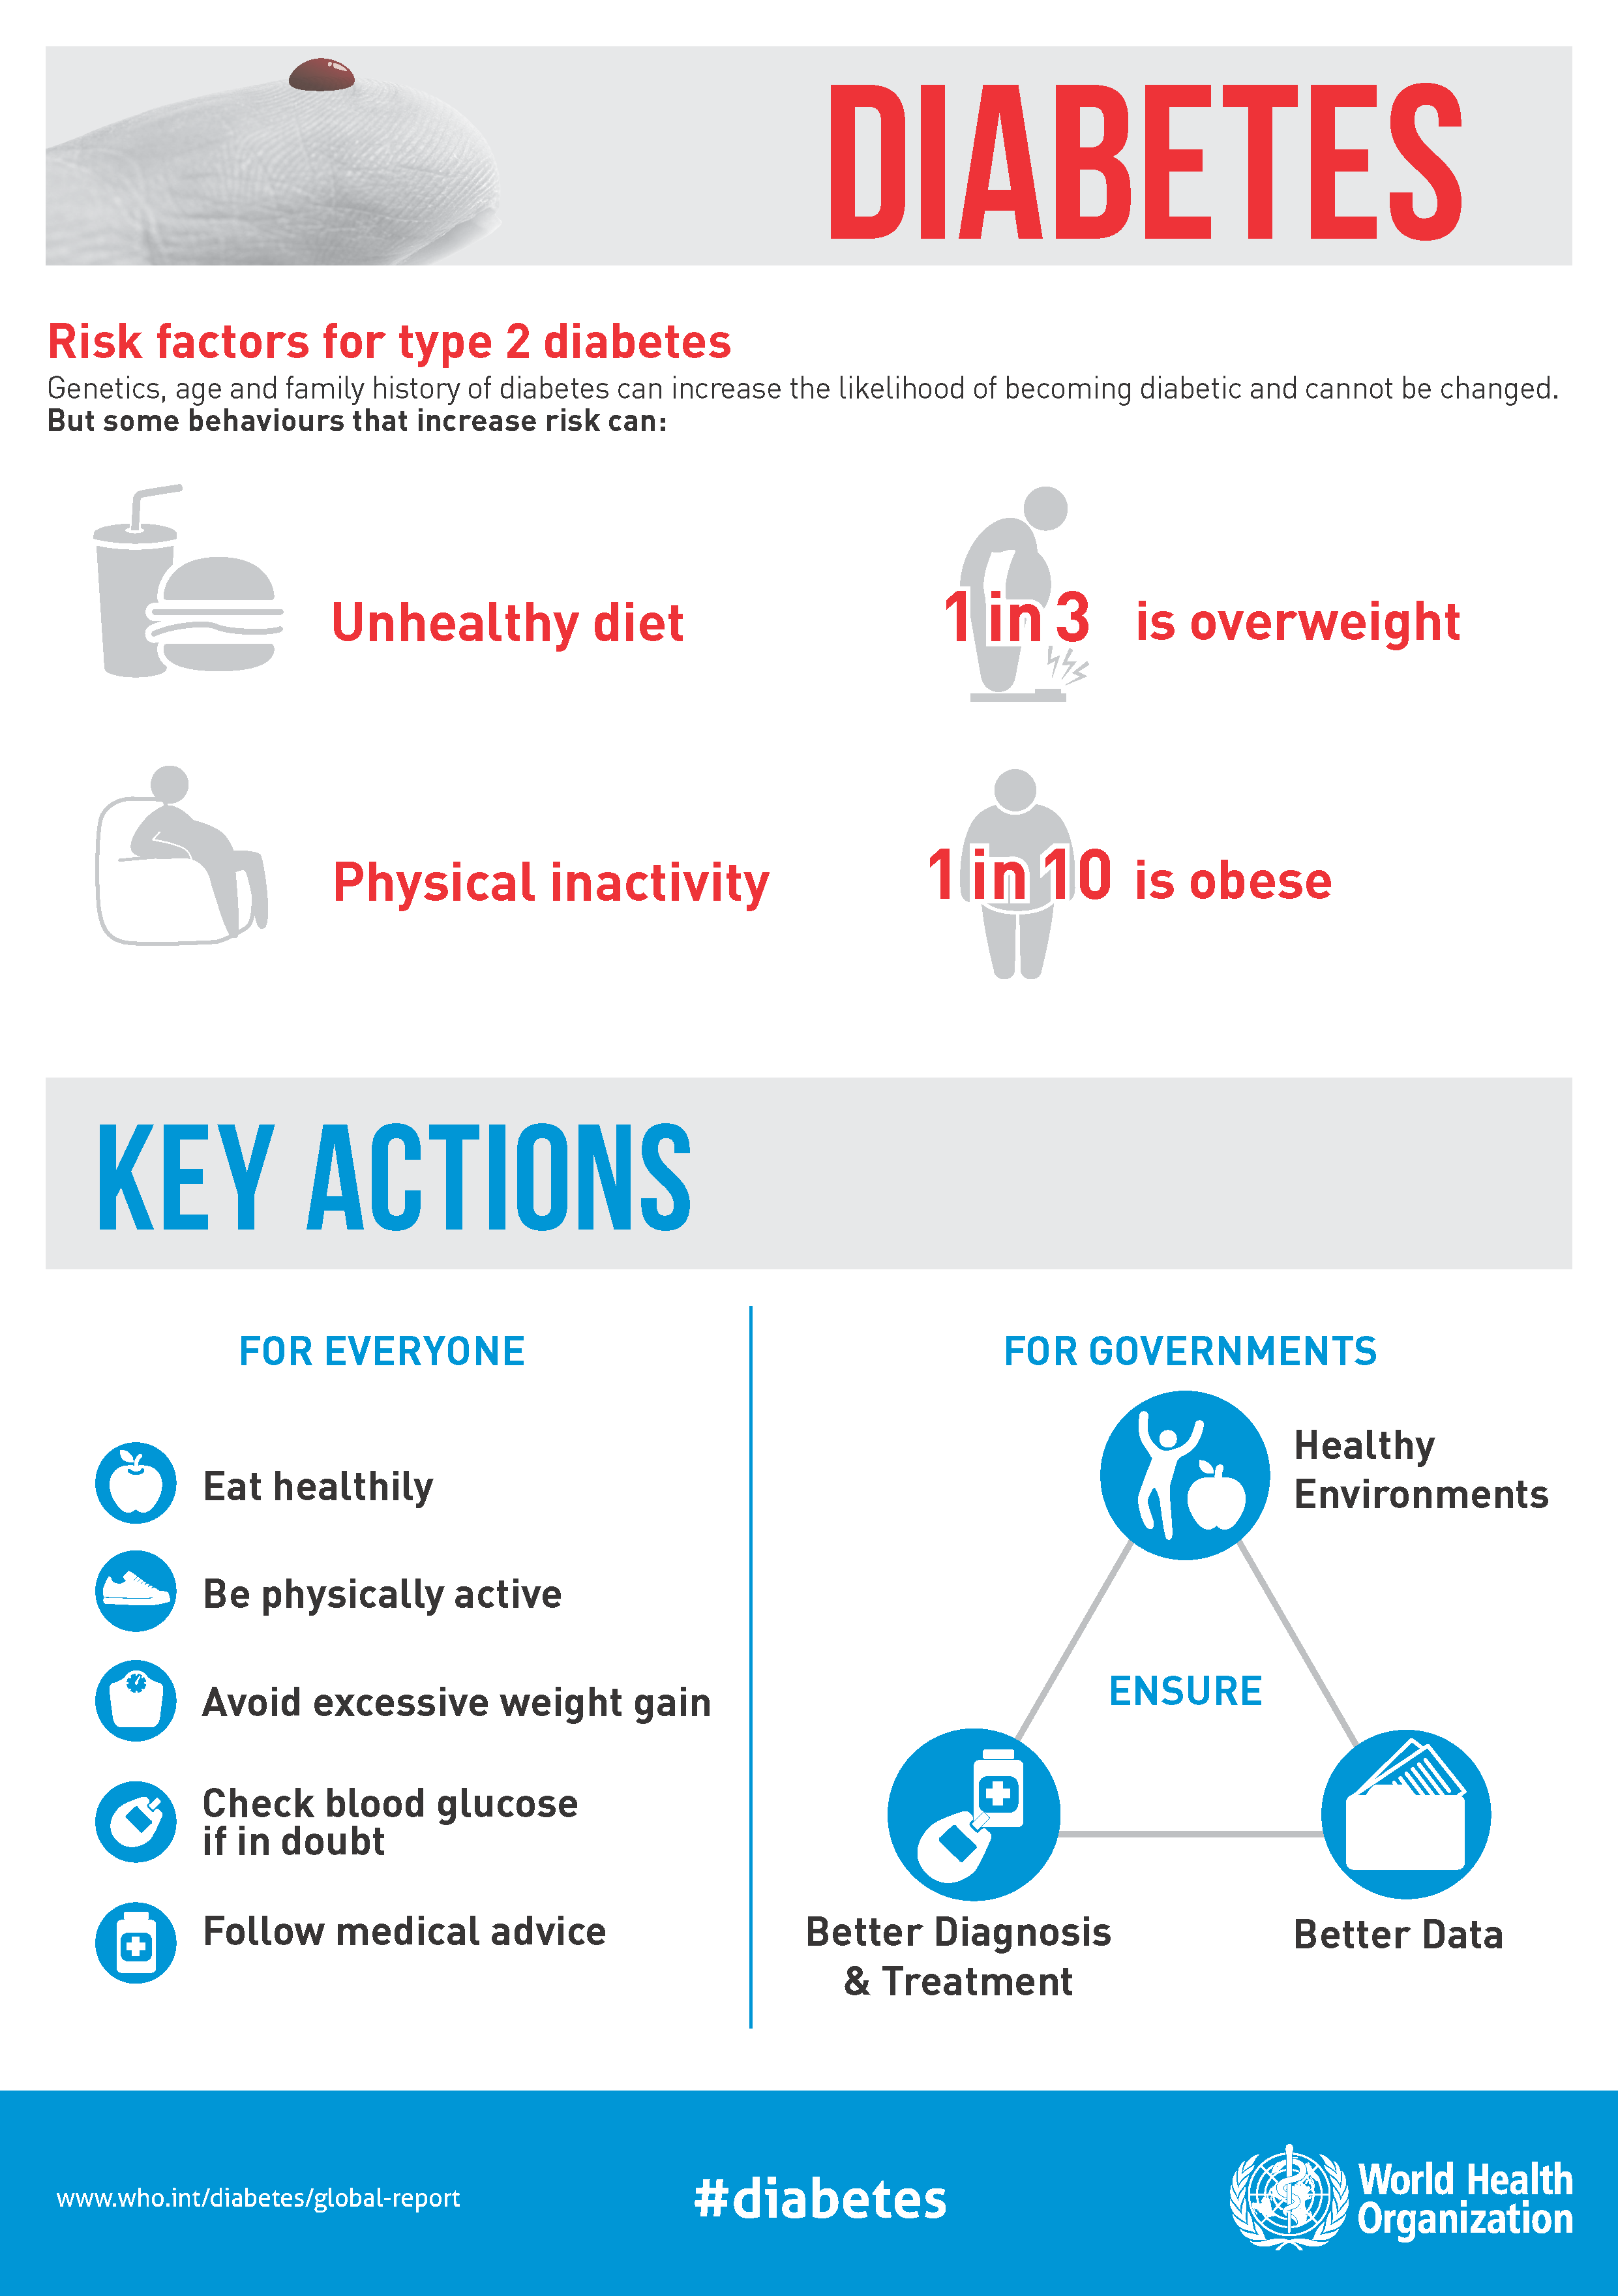 Diabetes infographic. Risk factors for type 2 diabetes: genetics, age and family history of diabetes can increase the likelihood of becoming diabetic and cannot be changed. But some behaviours that increase risk can: unhealthy diet, 1in 3 is overweight, physical inactivity, 1 in 10 is obese.

Key actions: For everyone - eat healthy, be physically active, avoid excessive wright gain, check blood glucose if in doubt, follow medical advice.

For governments: Ensure healthy environments, better diagnosis & treatments and better data.